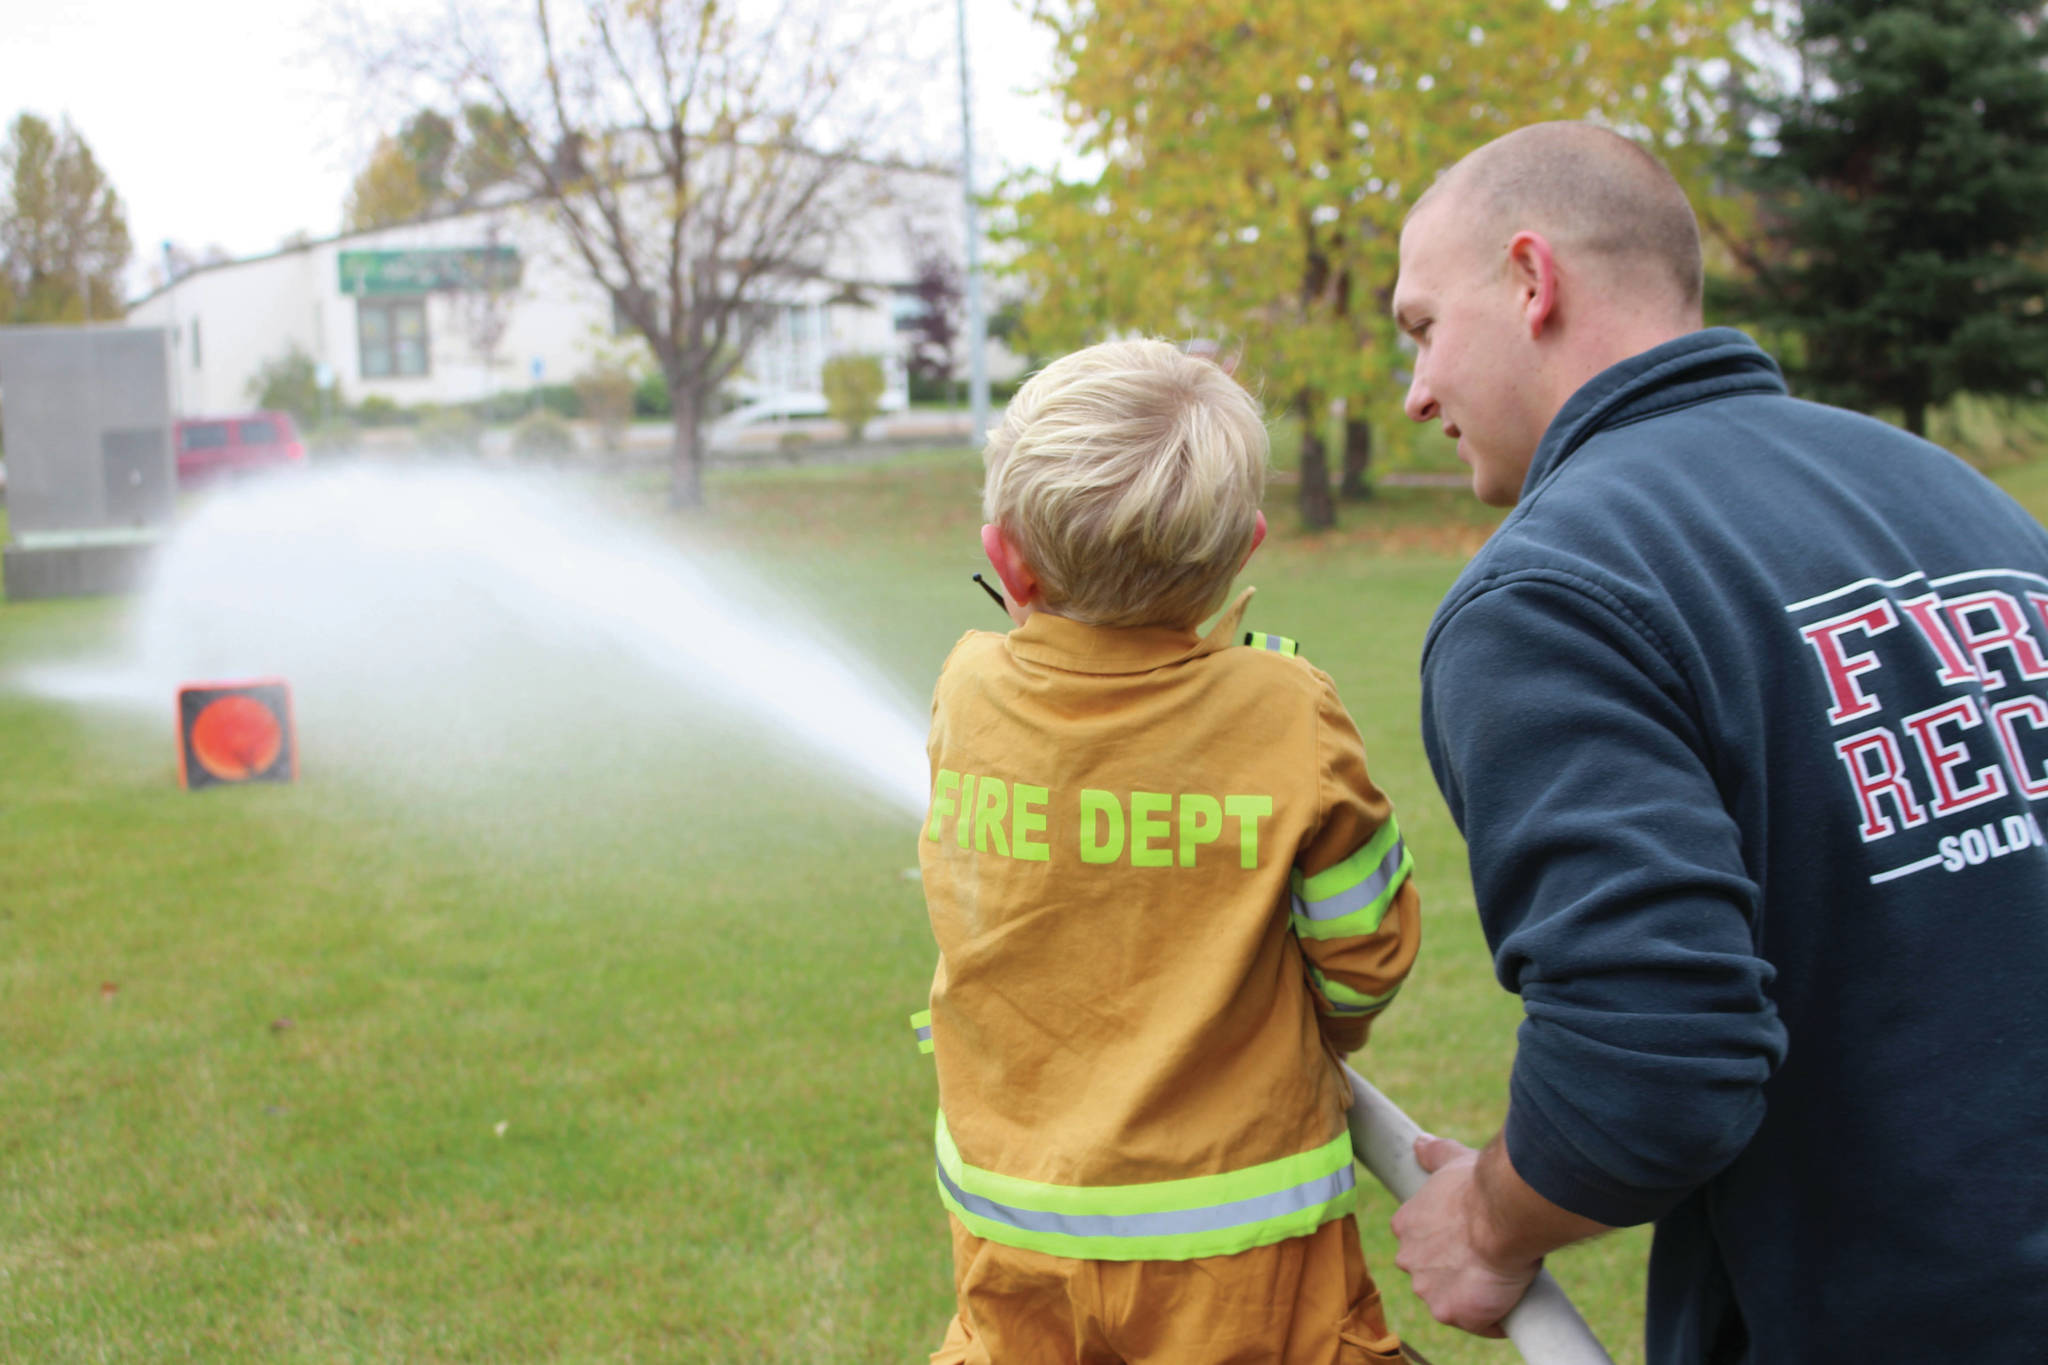 Brian Mazurek / Peninsula Clarion                                A young firefighter-in-training practices knocking down a water jug with a fire hose during the Central Emergency Services Open House at Fire Station 1 in Soldotna, Saturday.